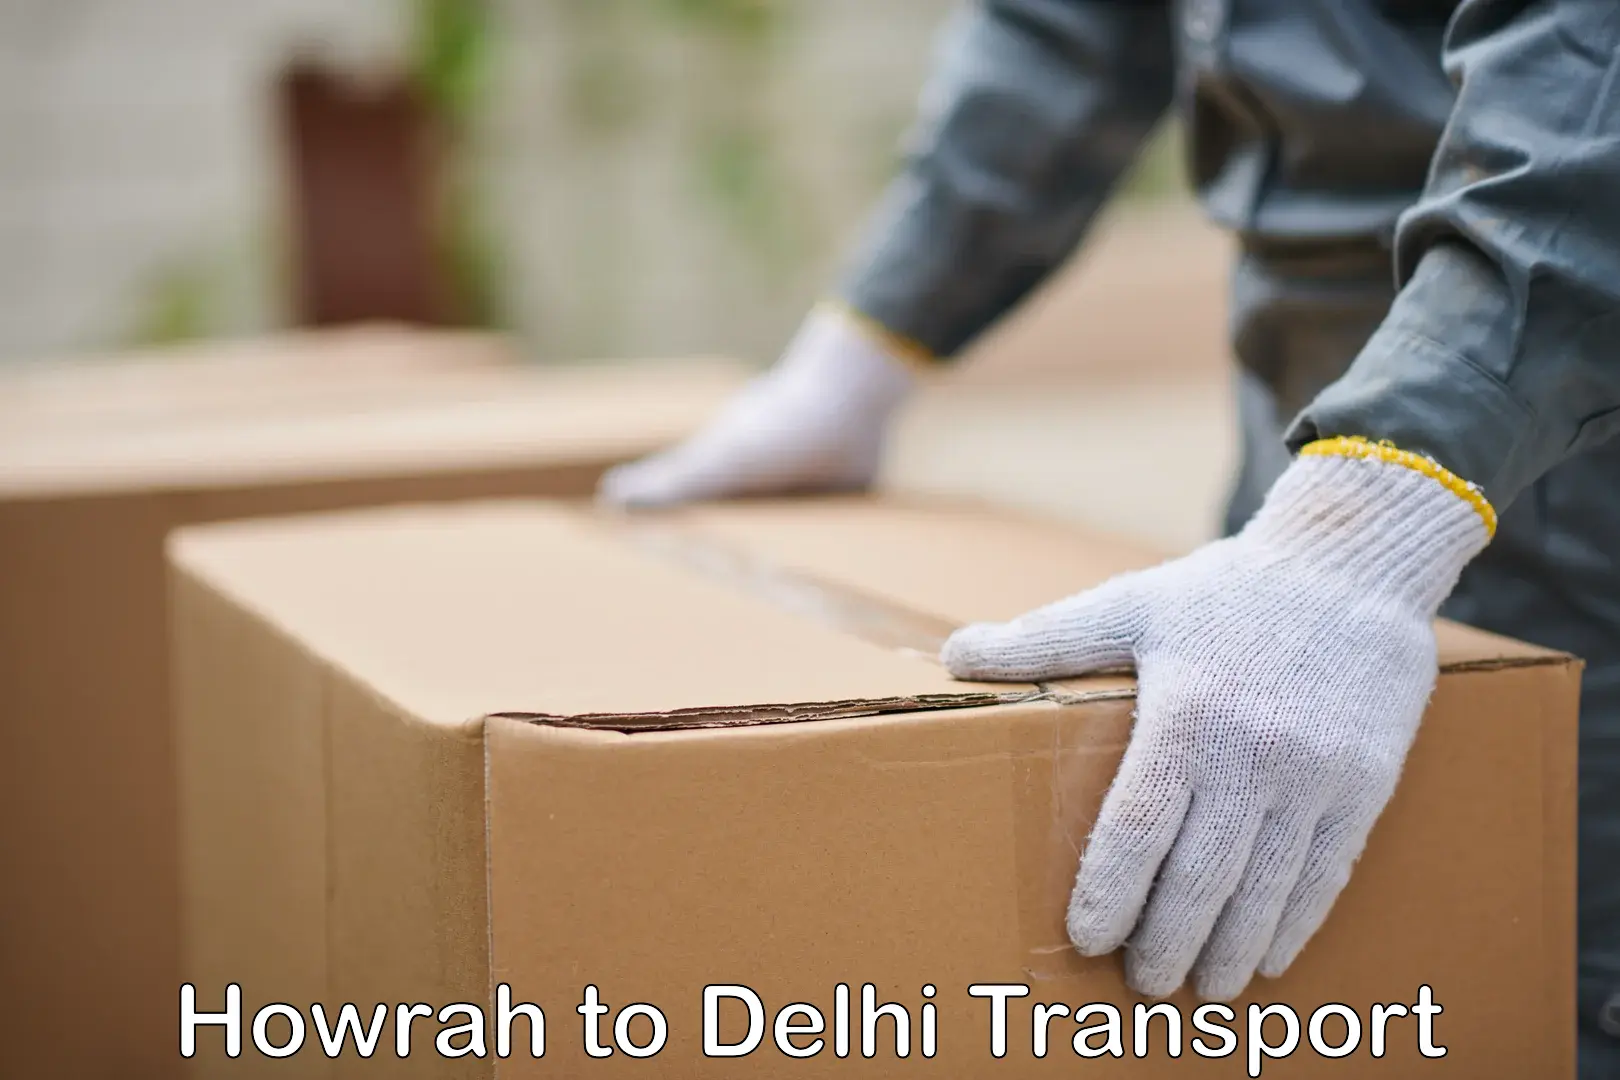 Delivery service Howrah to Delhi